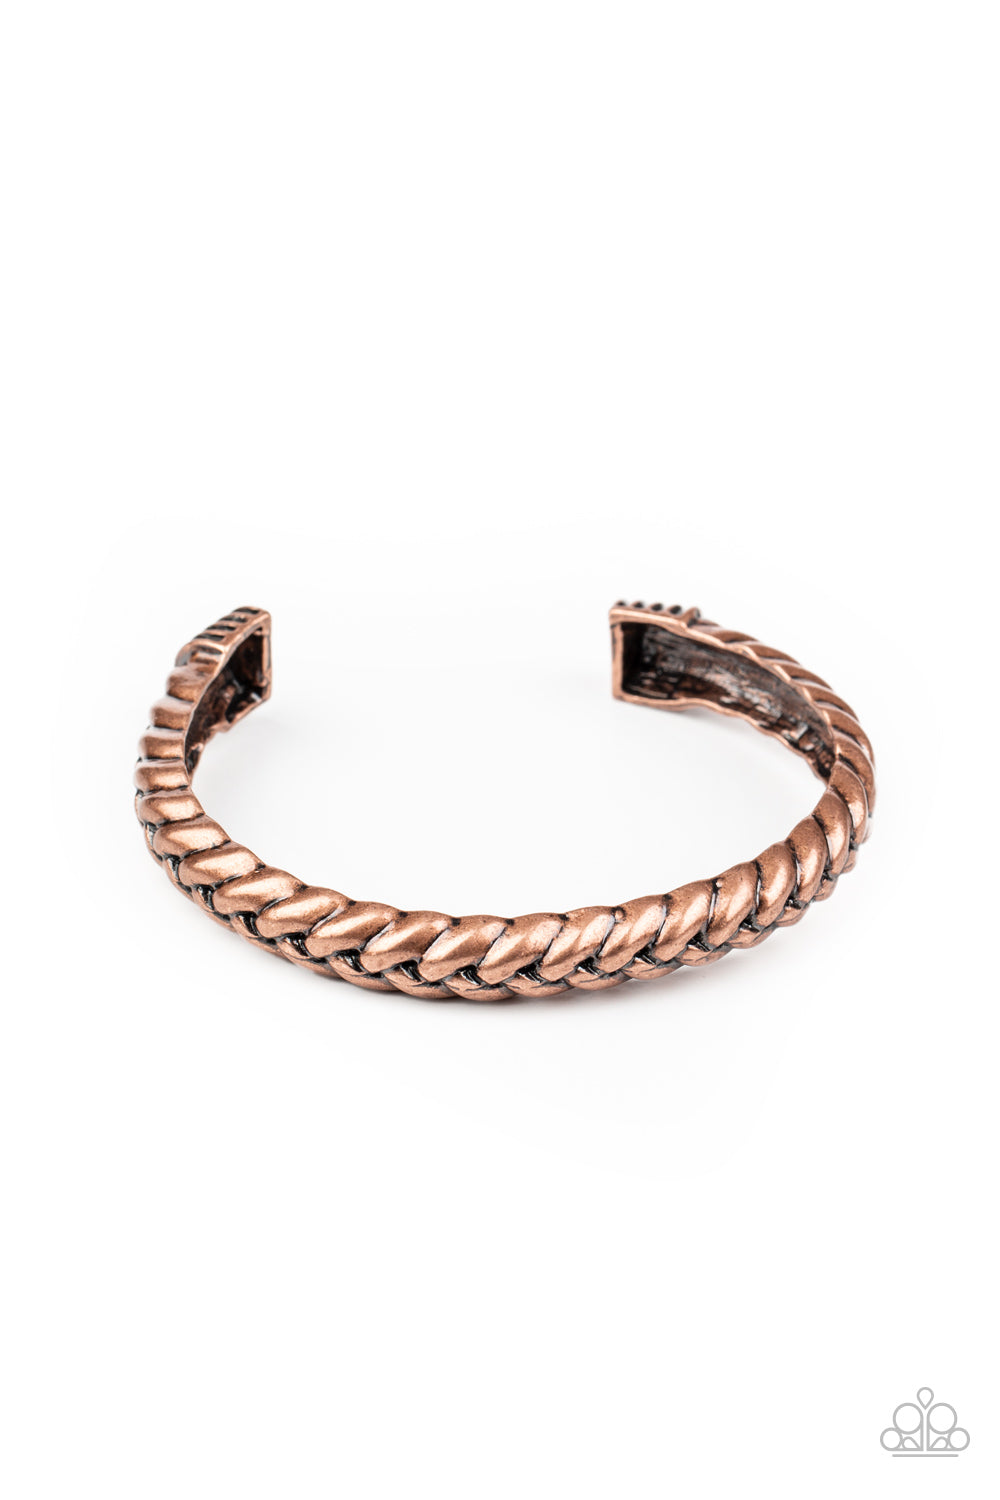 &lt;P&gt; Infused with decorative copper fittings, antiqued copper bars thickly weave into a bold industrial cuff around the wrist.&lt;/P&gt;  

&lt;P&gt; &lt;I&gt;Sold as one individual bracelet. &lt;/I&gt;&lt;/P&gt;

&lt;img src=\&quot;https://d9b54x484lq62.cloudfront.net/paparazzi/shopping/images/517_tag150x115_1.png\&quot; alt=\&quot;New Kit\&quot; align=\&quot;middle\&quot; height=\&quot;50\&quot; width=\&quot;50\&quot;/&gt;